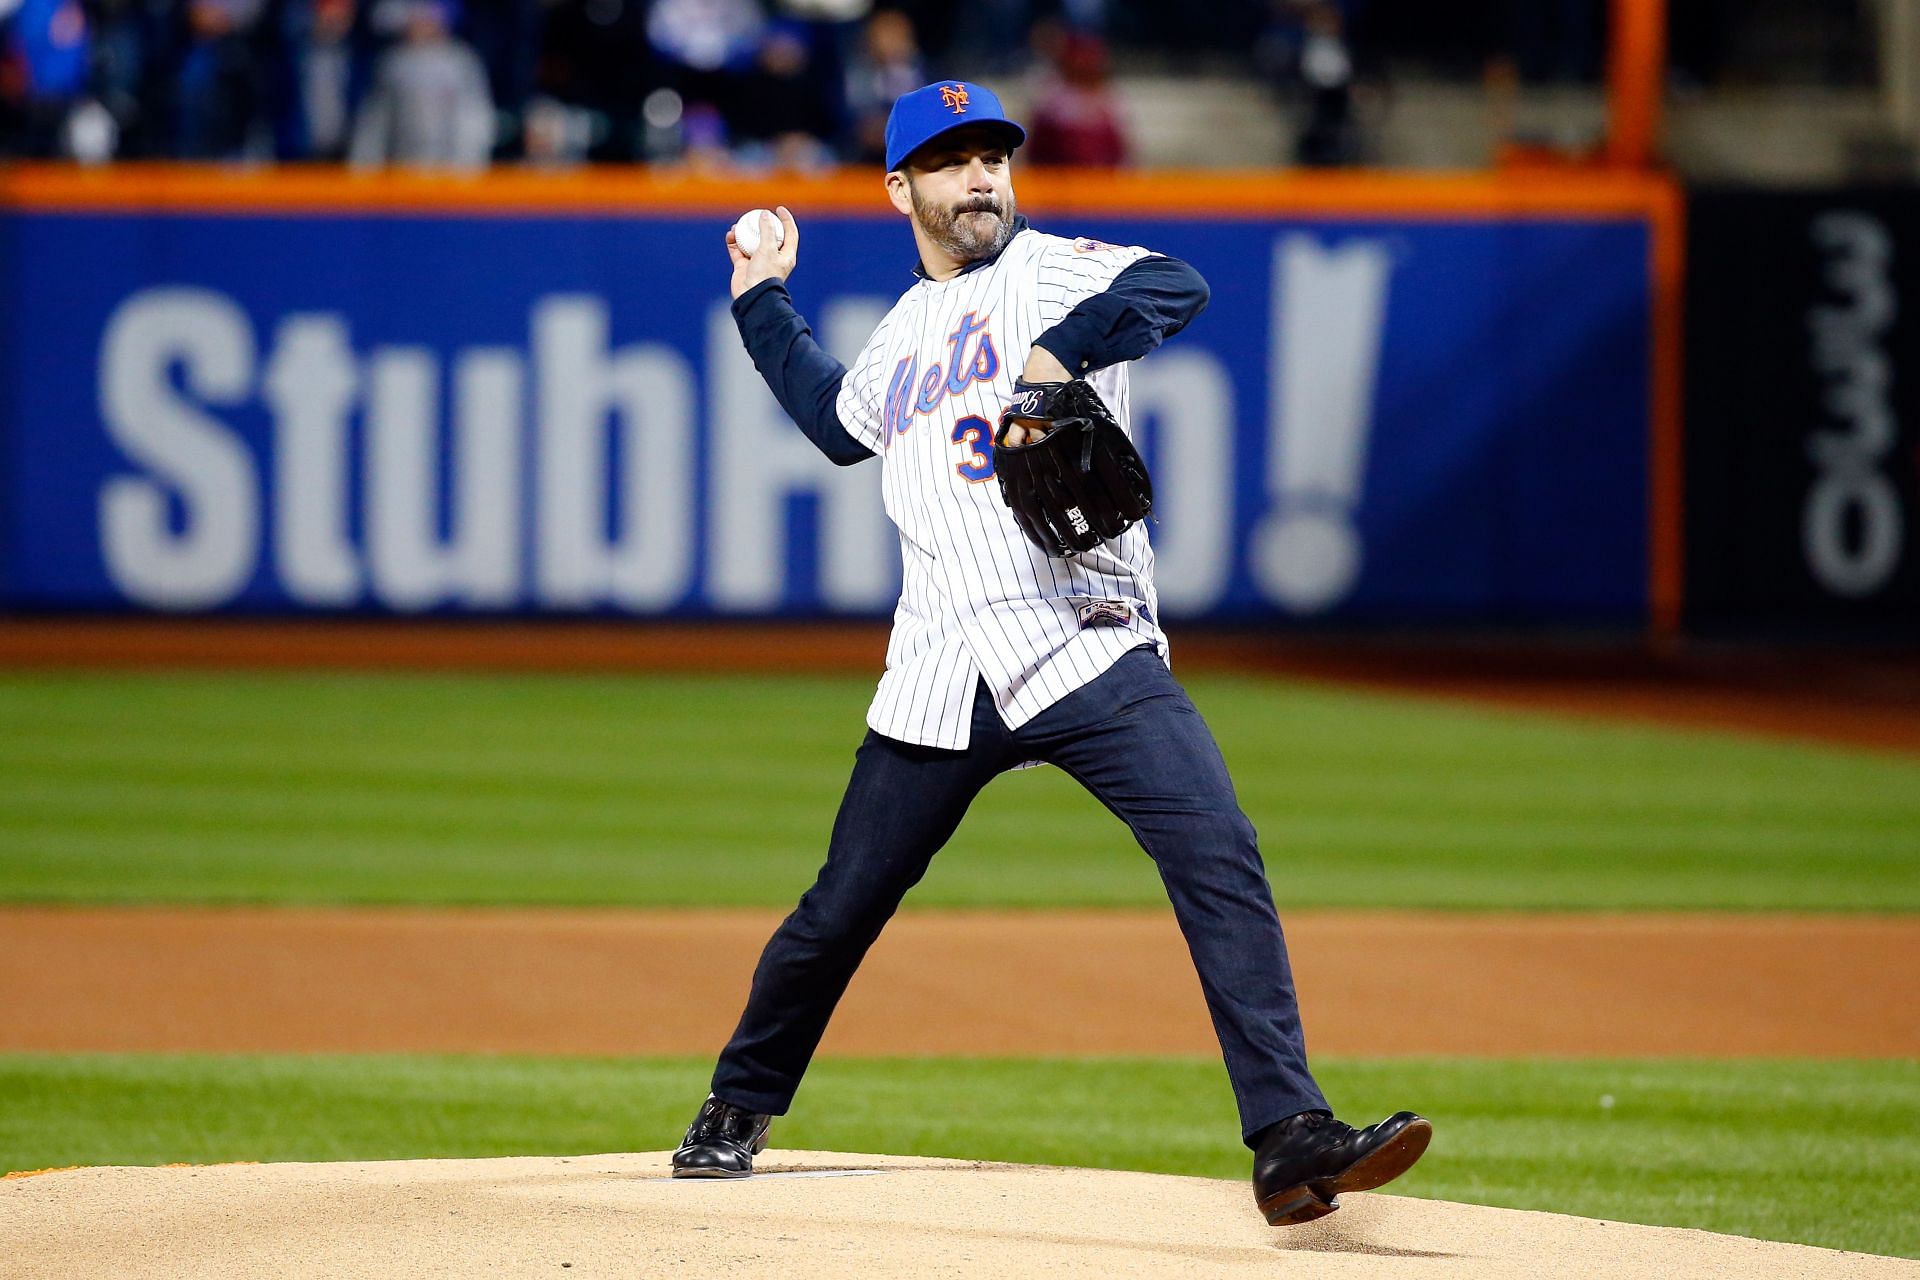 Jimmy Kimmel throws out first pitch for the League Championship - Chicago Cubs v New York Mets - Game Two.